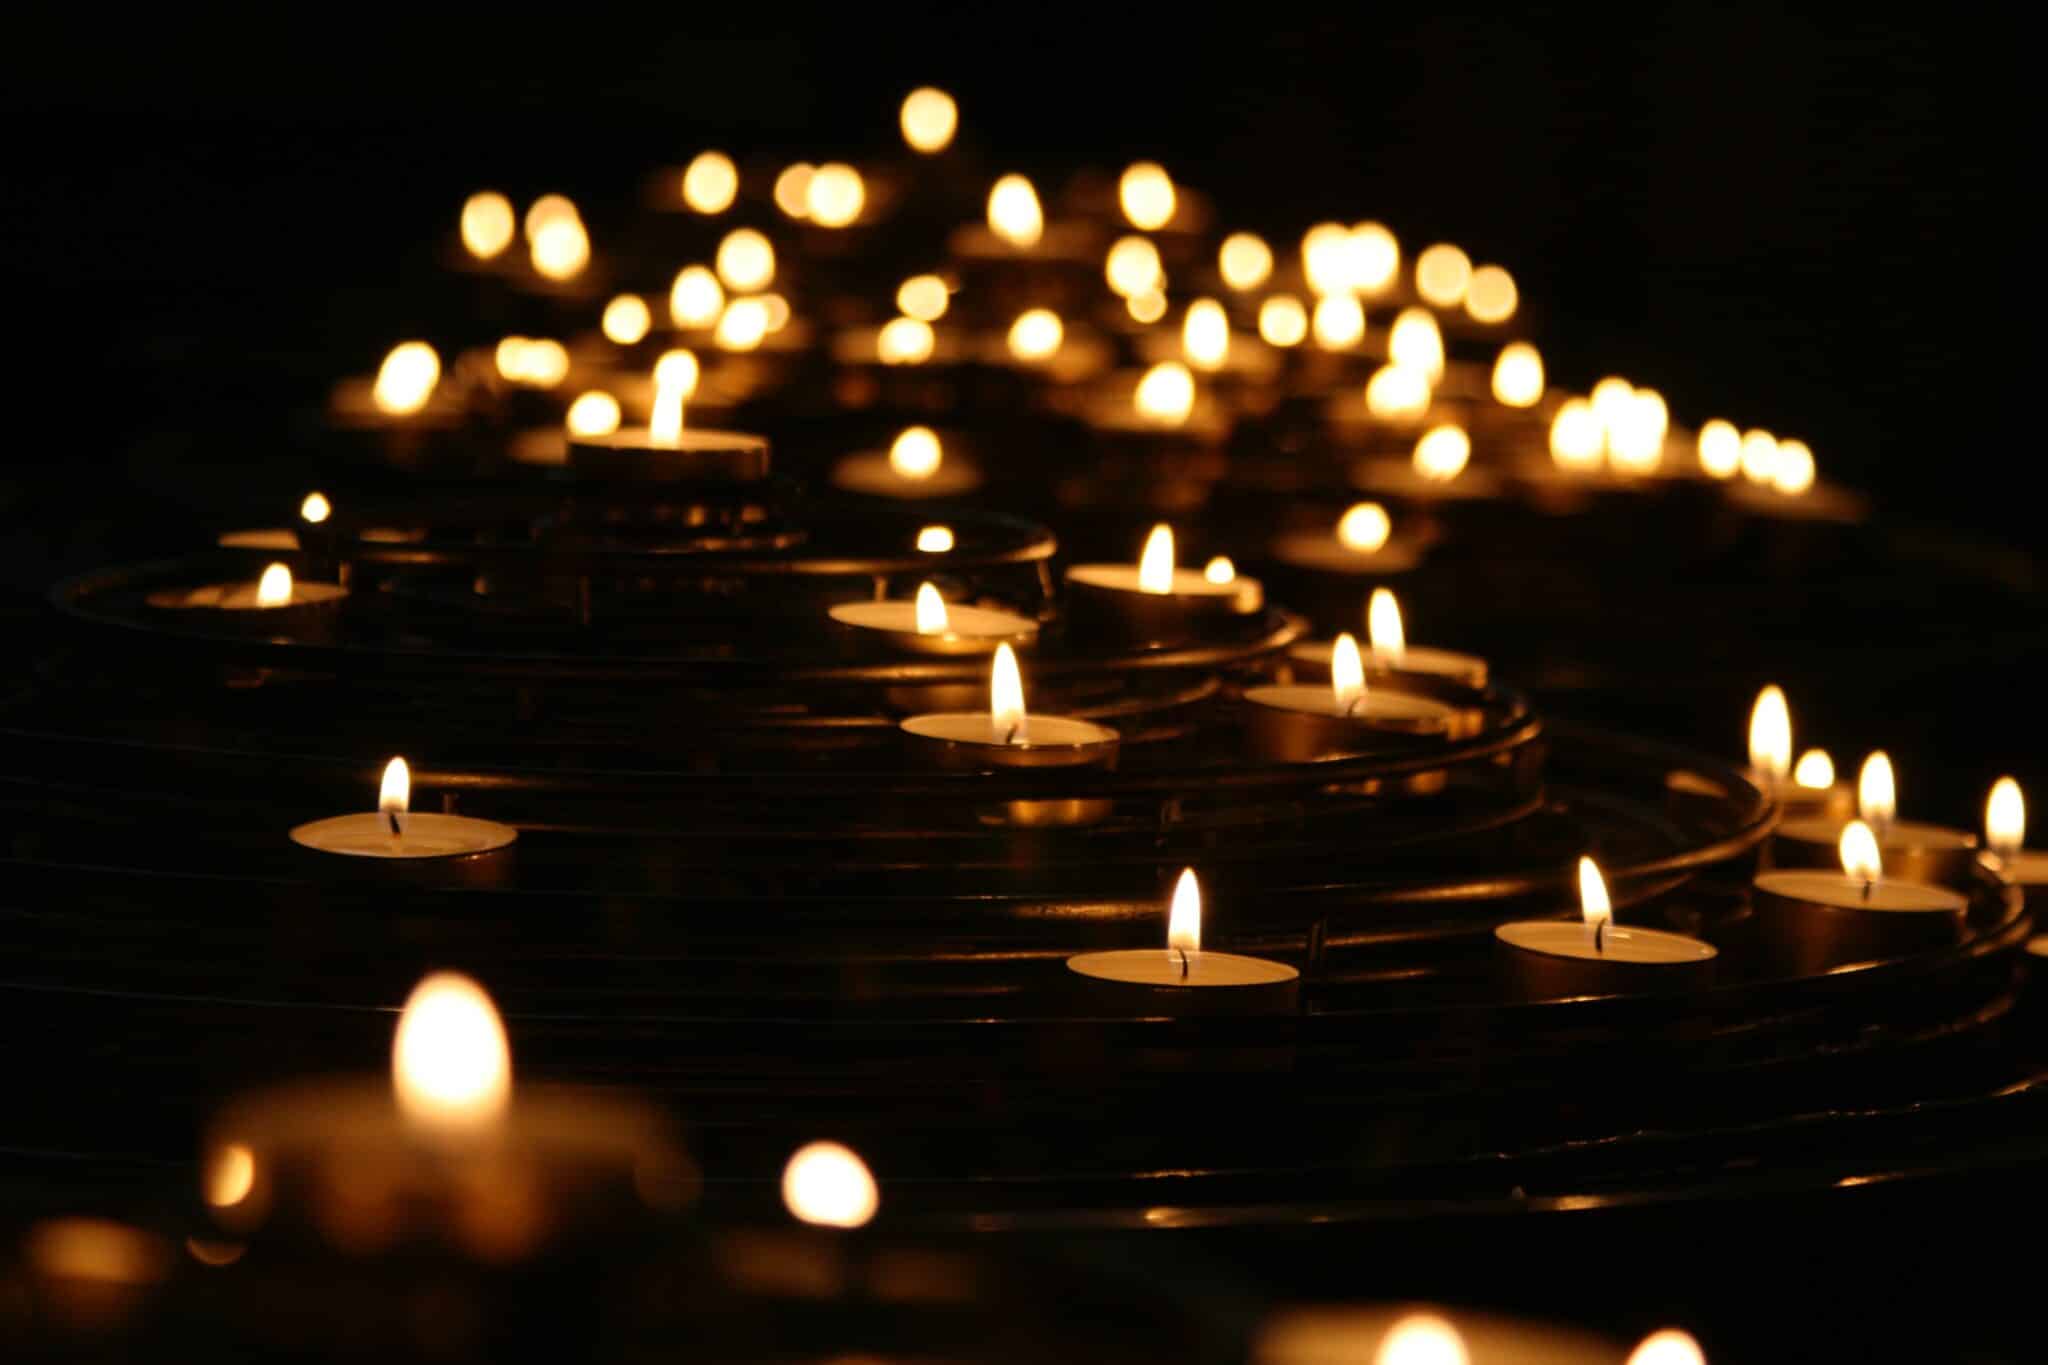 Votive candles | Photo by Mike Labrum on Unsplash